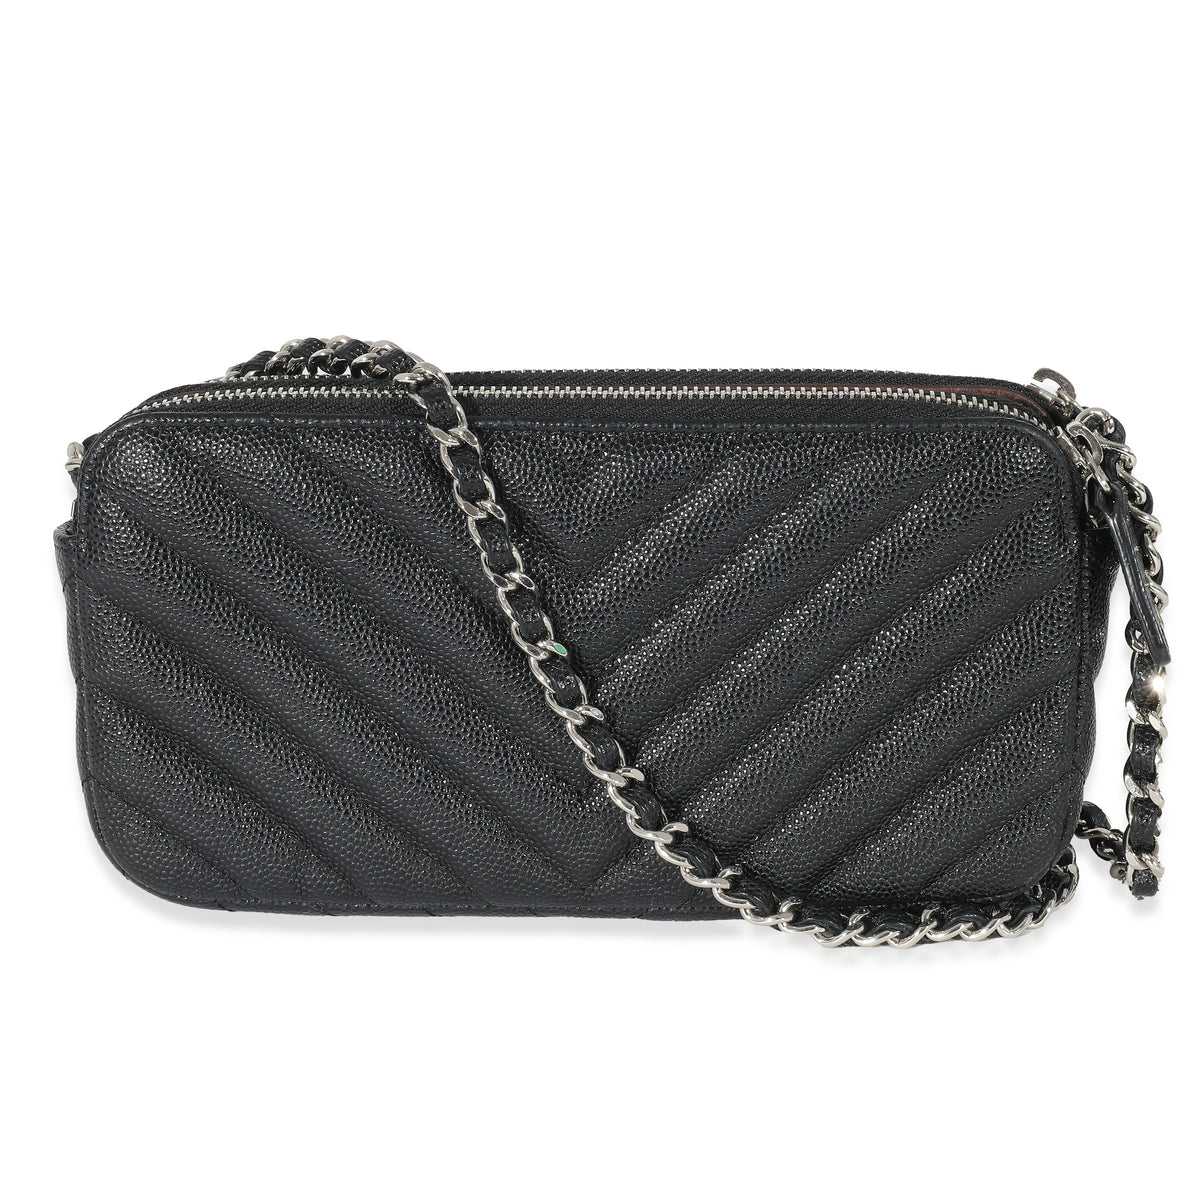 Chanel Beige/Black Quilted Calfskin Leather Gabrielle Clutch with